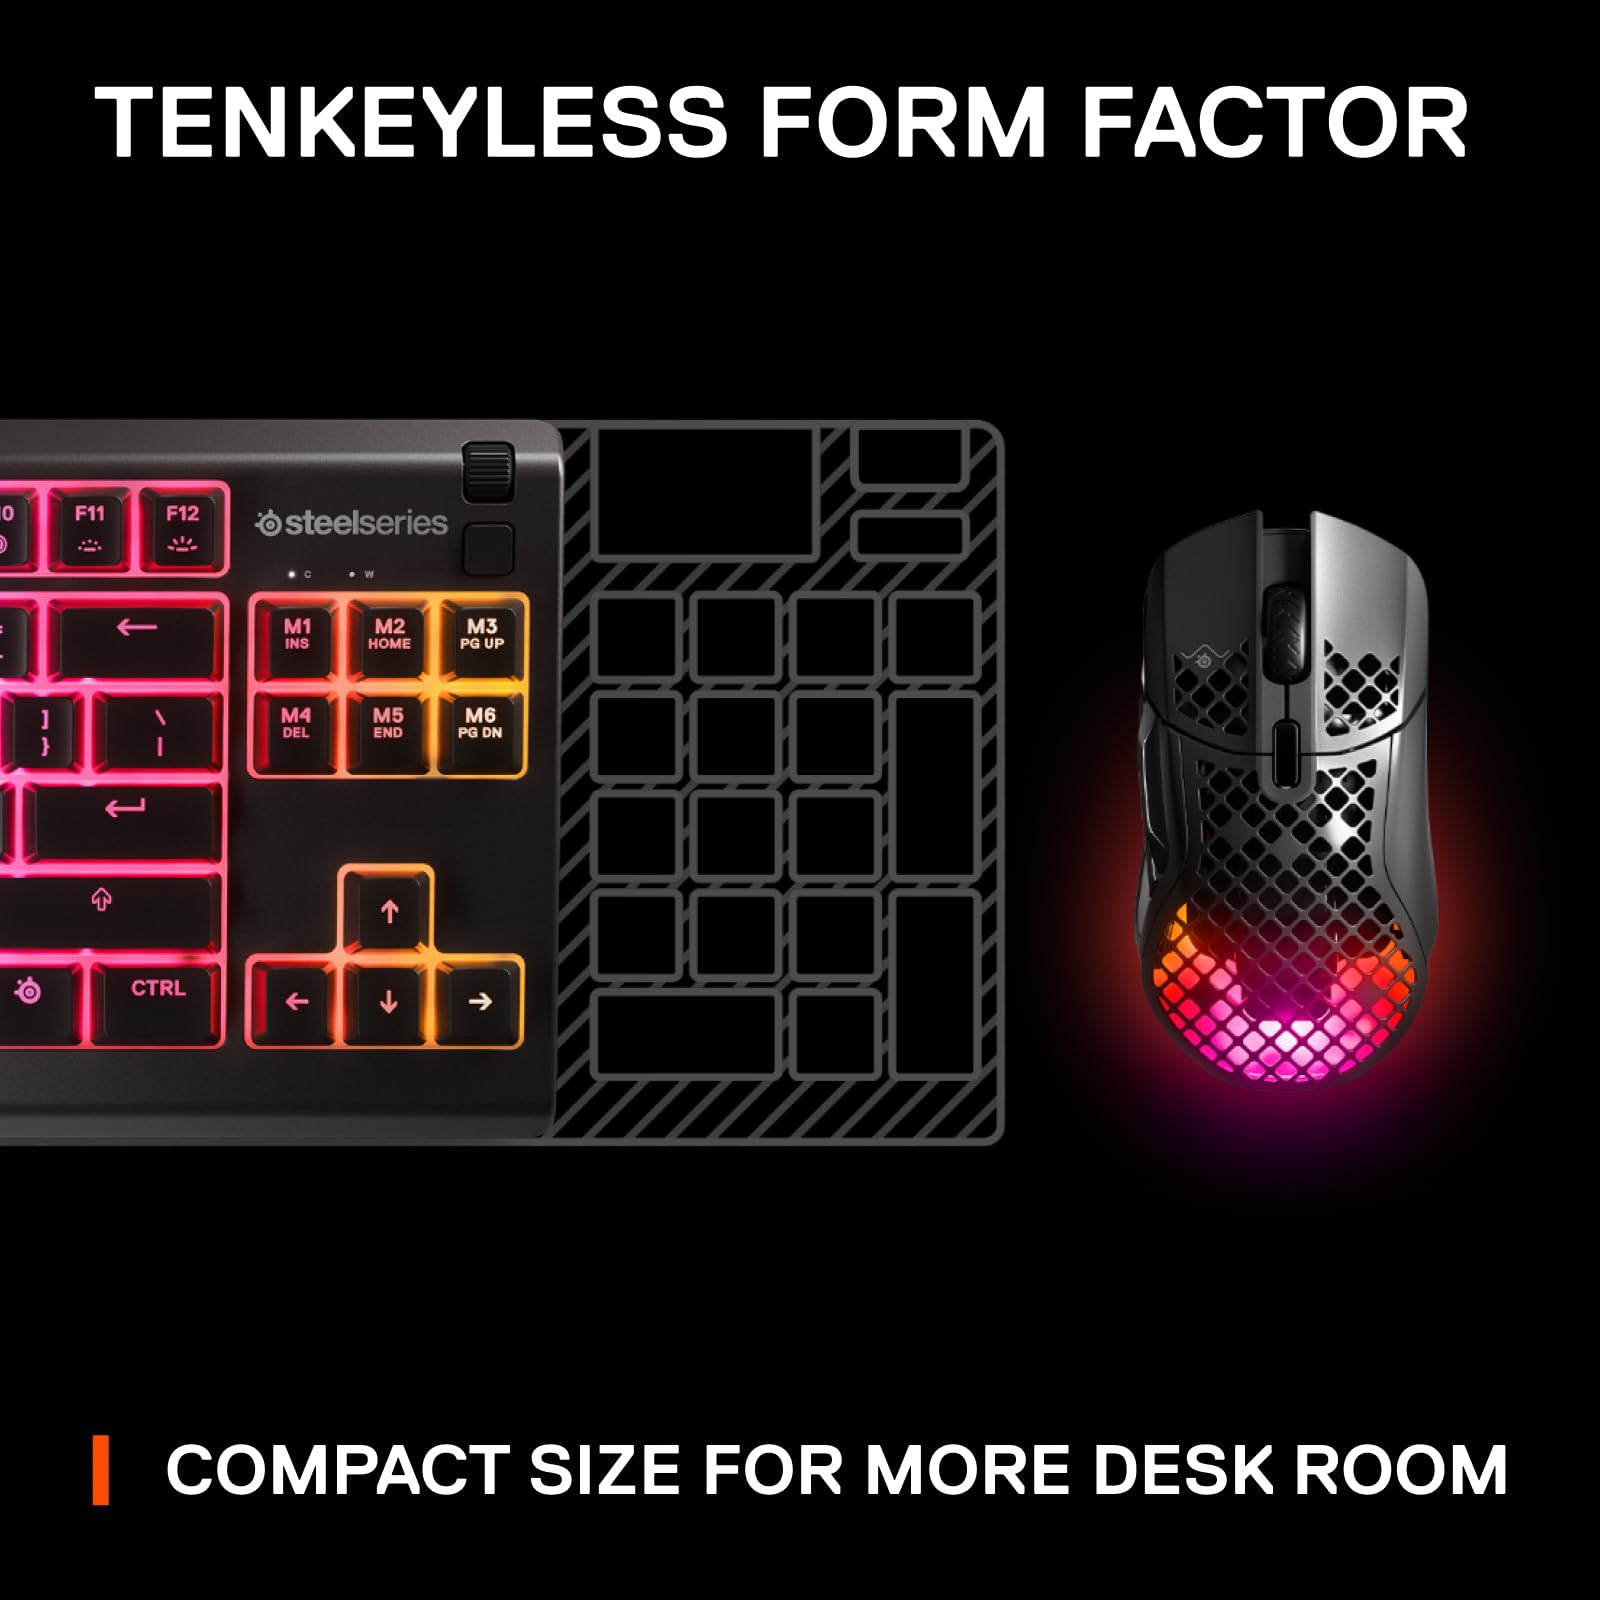 SteelSeries Apex 3 TKL RGB Gaming Keyboard – Tenkeyless Compact Form Factor - 8-Zone RGB Illumination – IP32 Water & Dust Resistant – Whisper Quiet Gaming Switch – $44.99